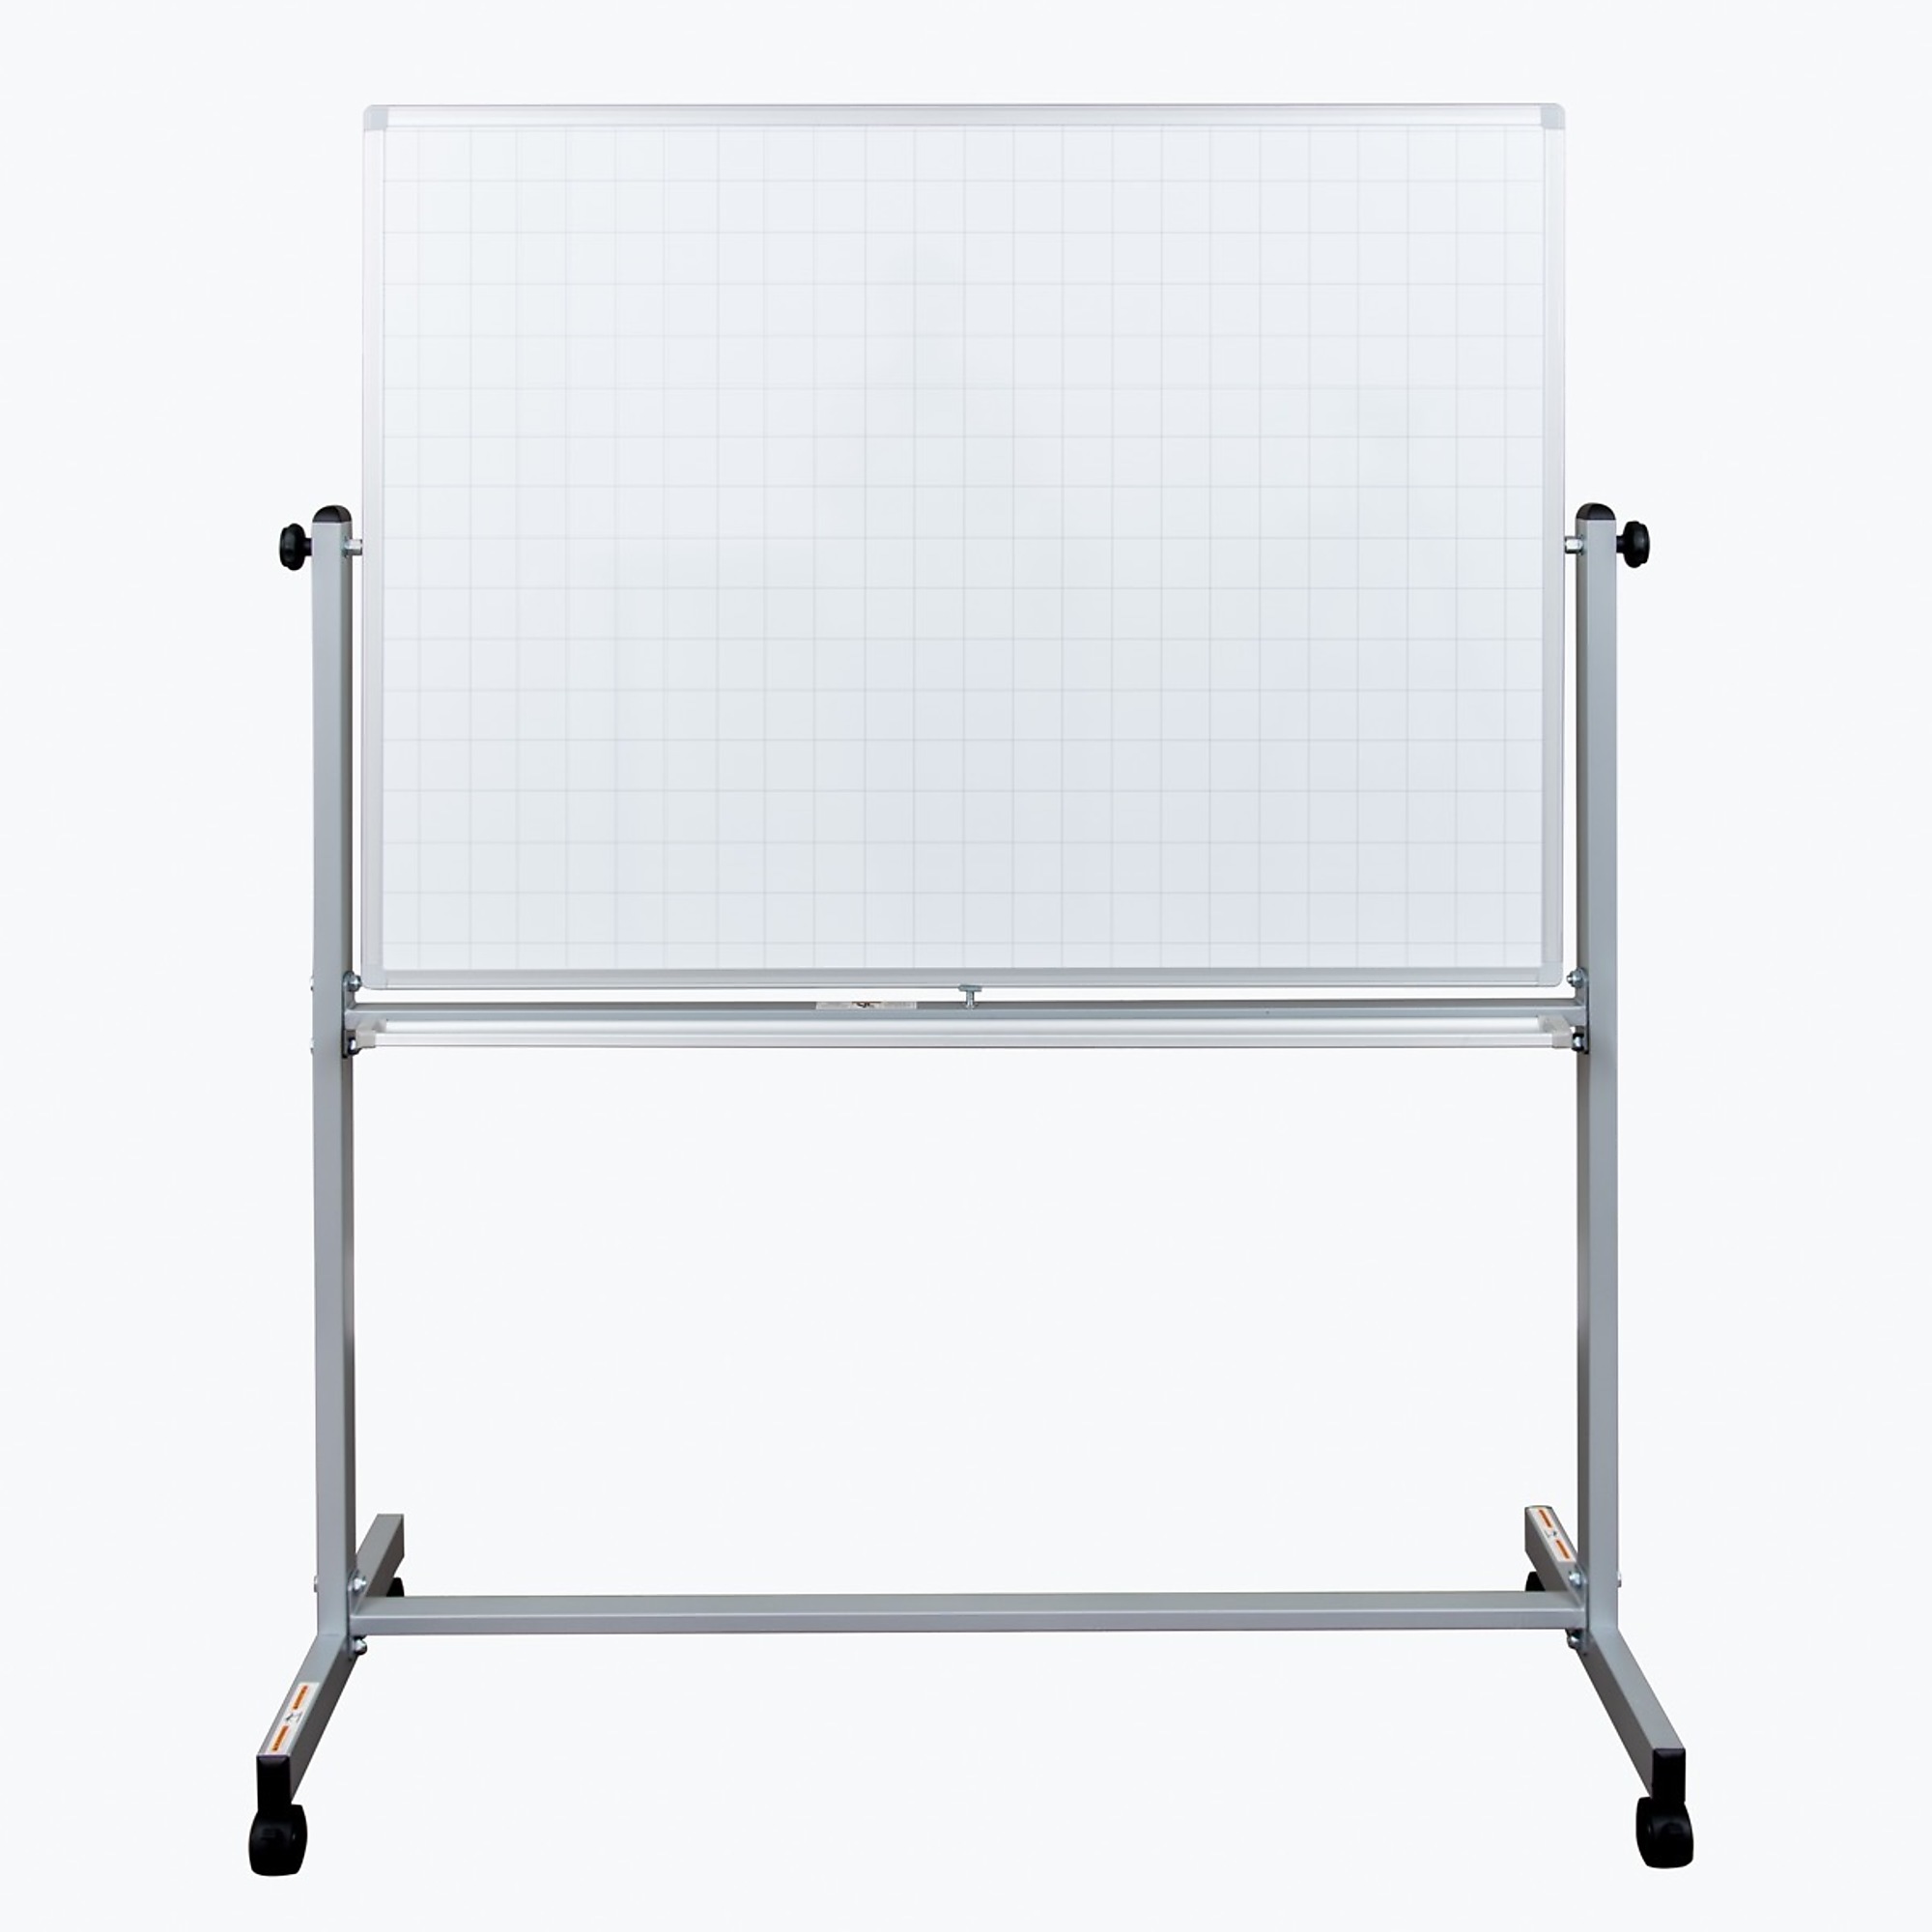 Mobile Magnetic Dry Erase Ghost Grid Board, Color Finish White, Pieces (qty.) 1, Material Steel, Model - Luxor MB4836LB